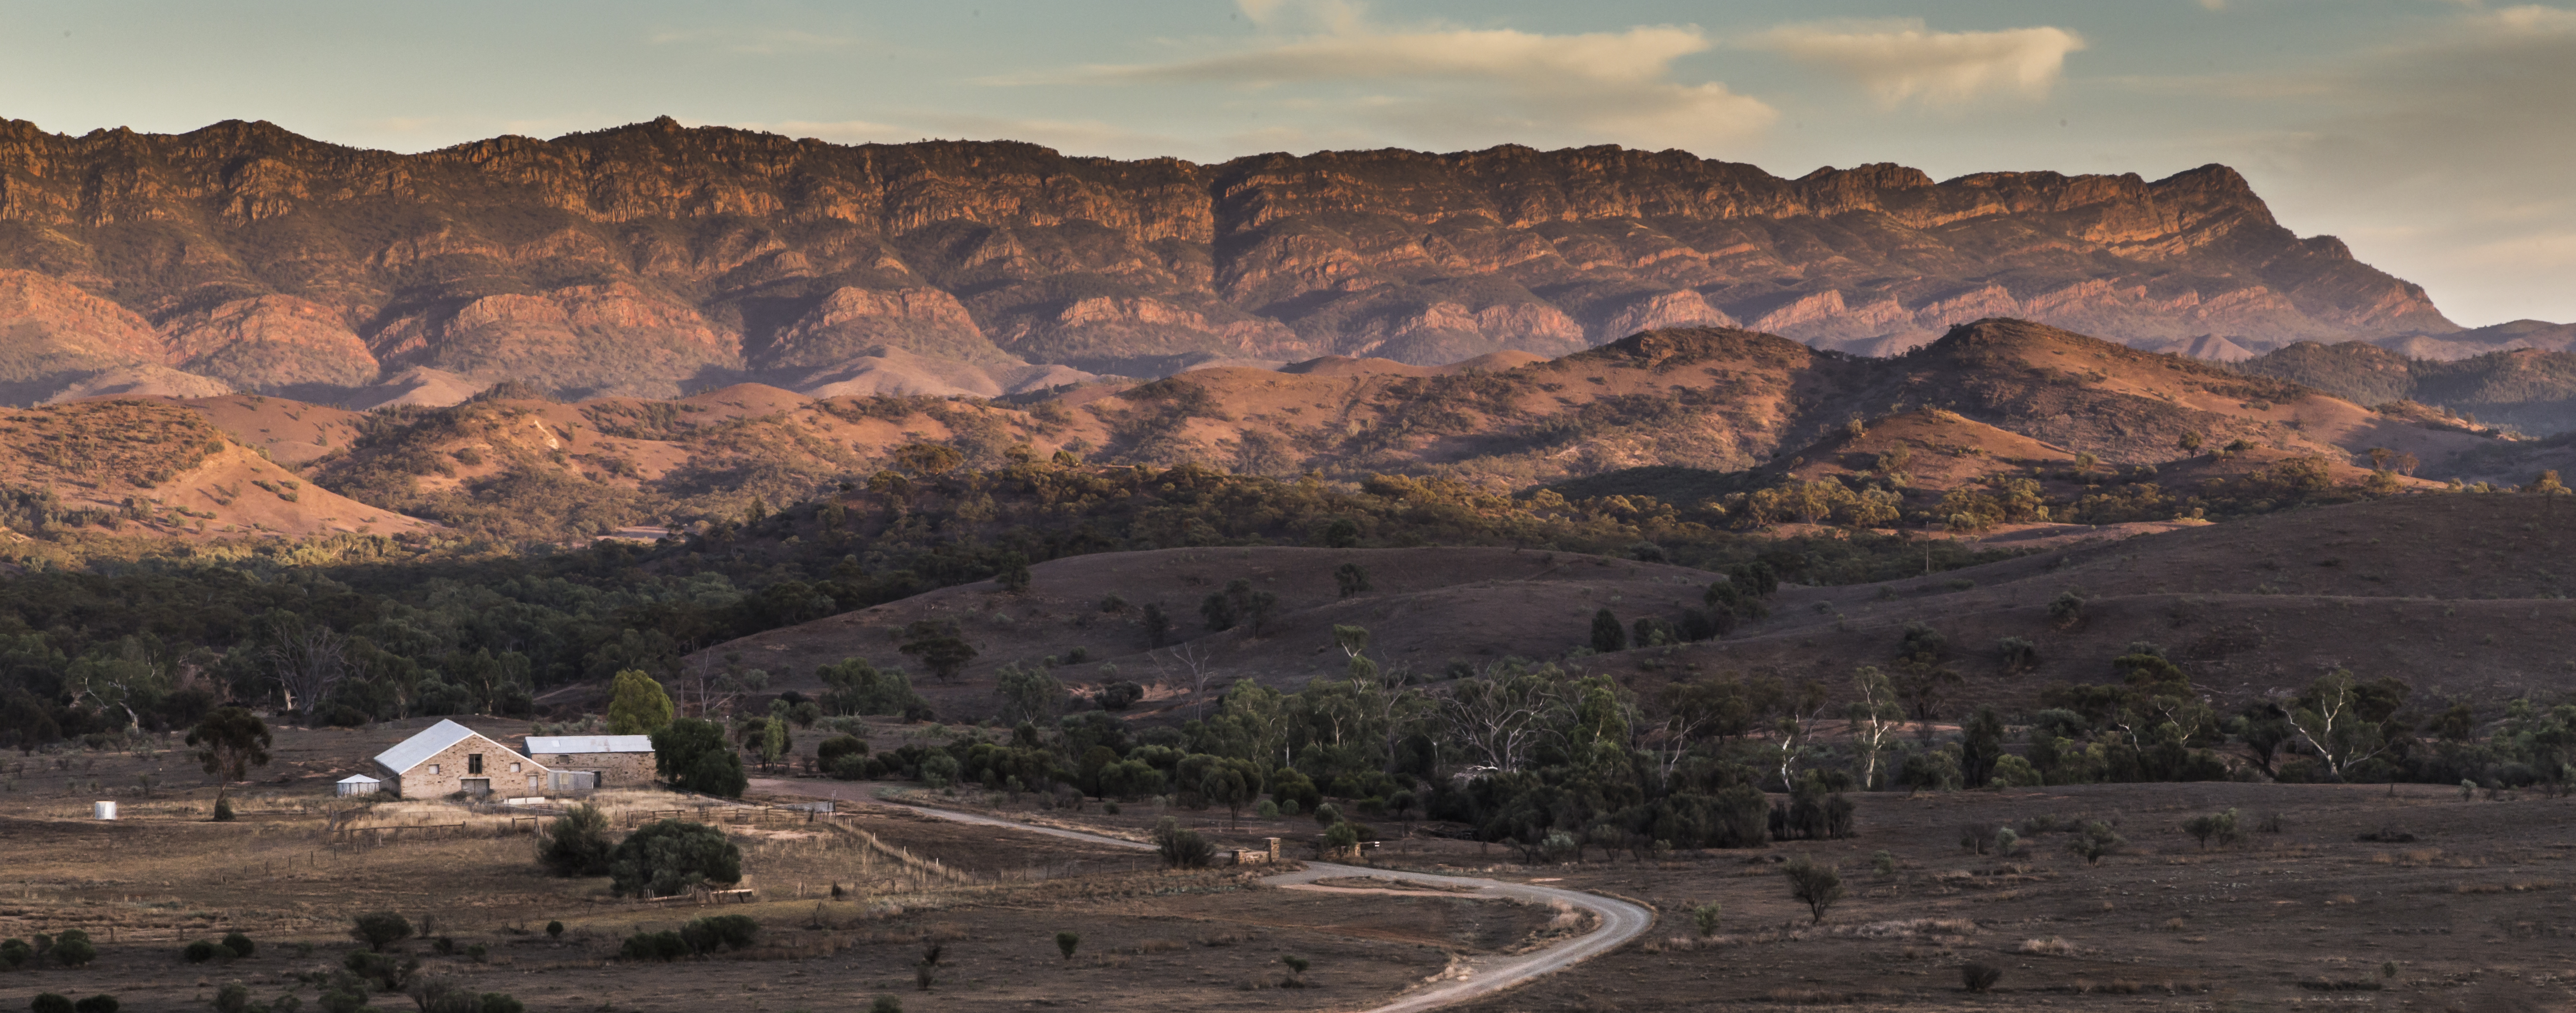 Arkaba_Flinders-Ranges_Woolshed-Ranges - Click to view larger version